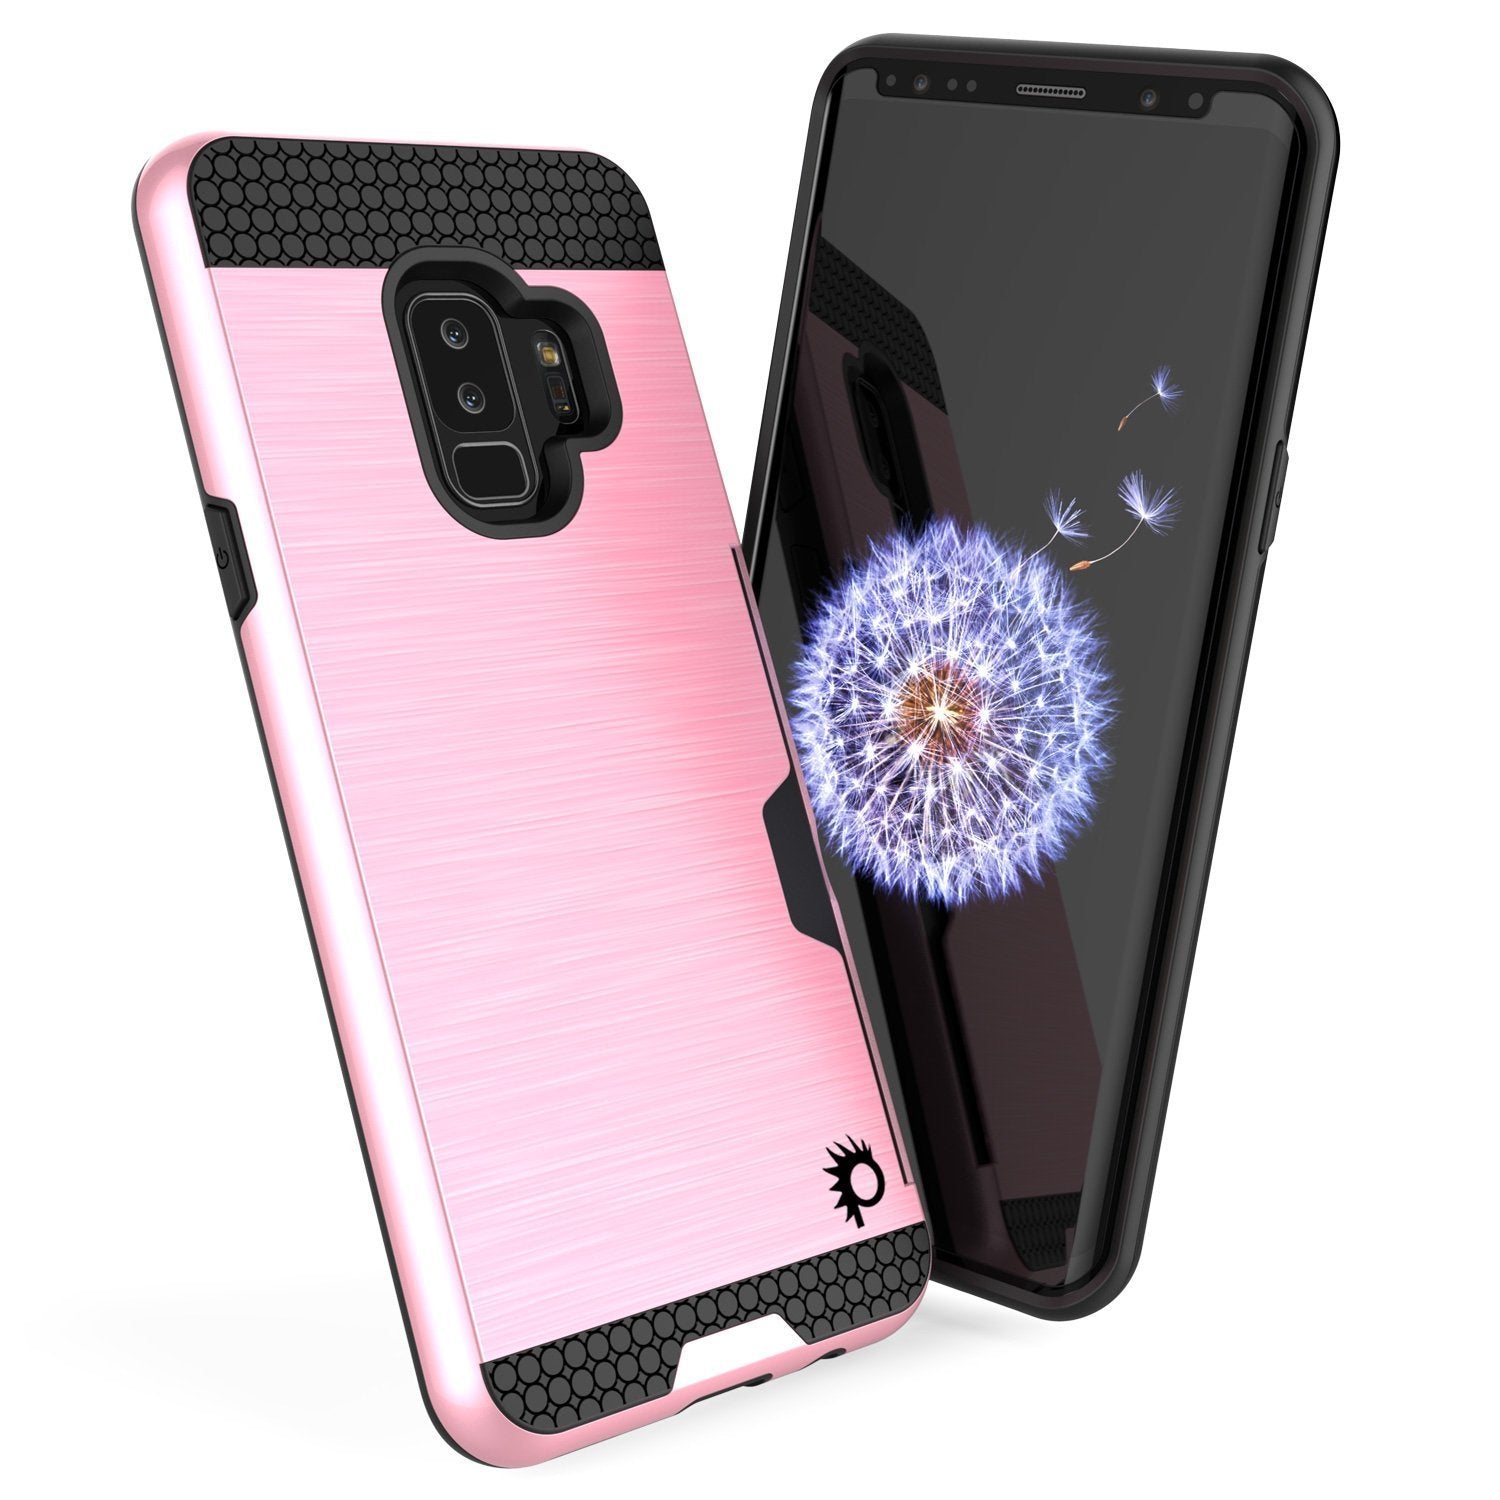 Galaxy S9 Plus Case, PUNKcase [SLOT Series] [Slim Fit] Dual-Layer Armor Cover w/Integrated Anti-Shock System [Pink] - PunkCase NZ